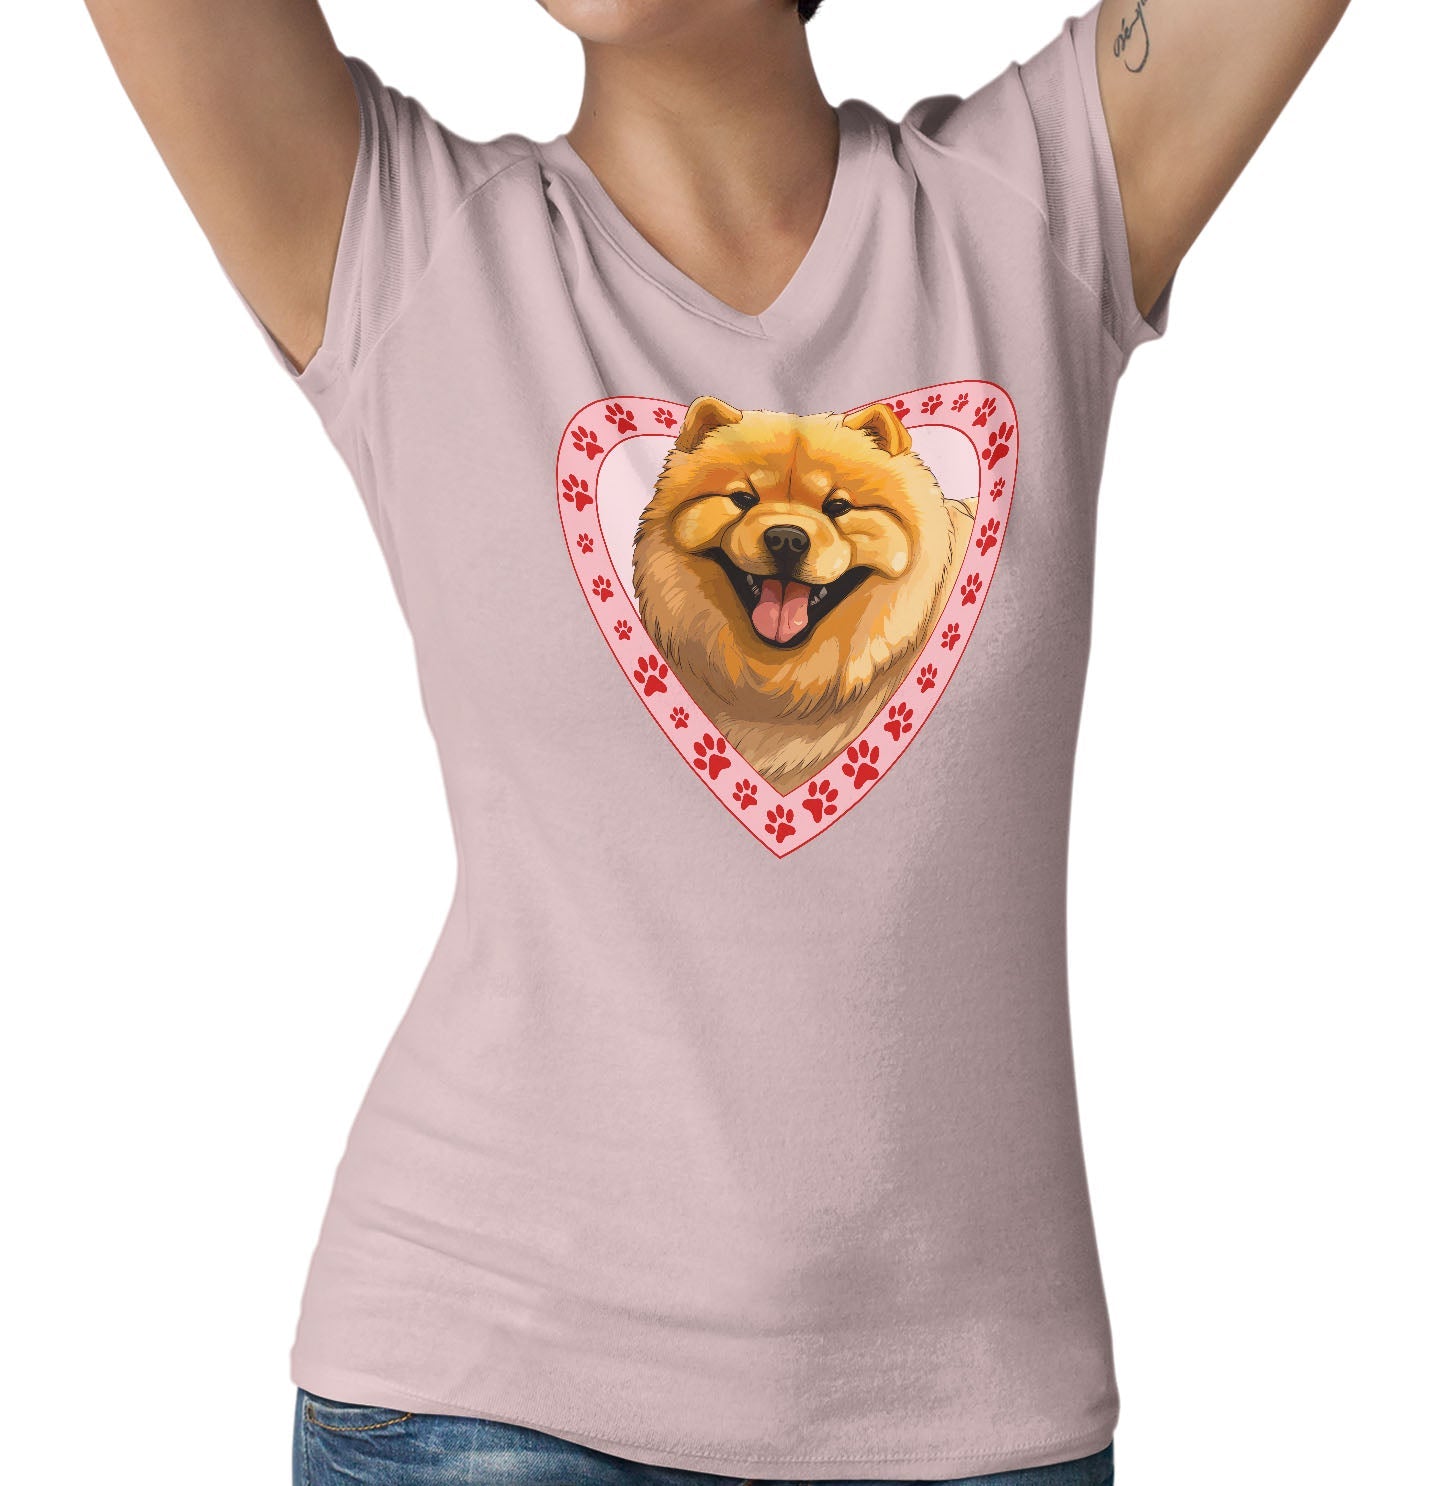 Chow Chow Illustration In Heart - Women's V-Neck T-Shirt